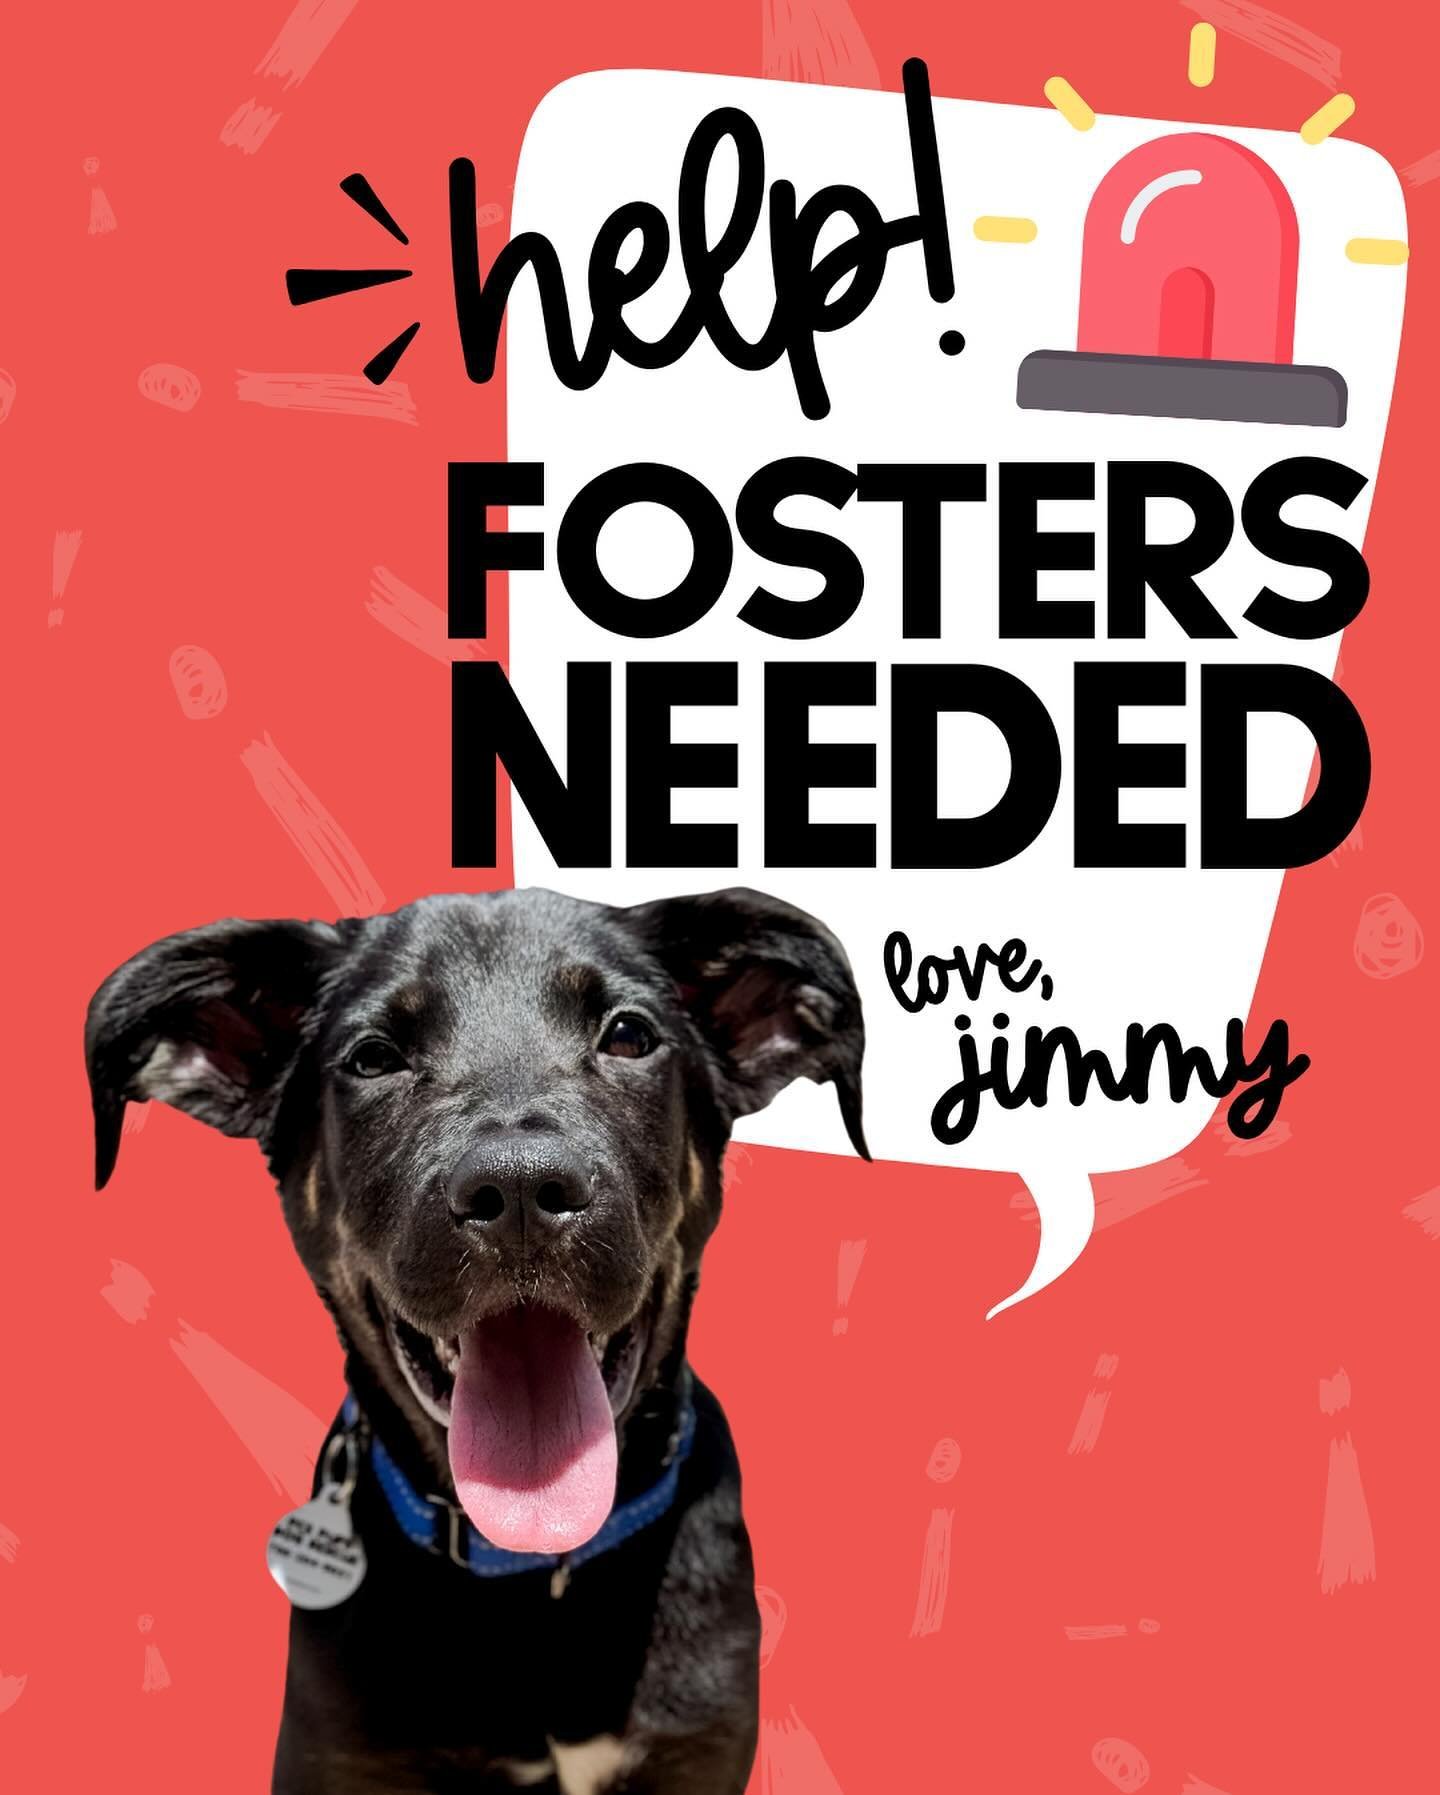 ⚠️ FOSTERS URGENTLY NEEDED |  INTAKES CLOSED

This is our least favorite thing to post. In an attempt to avoid closing intakes completely, we&rsquo;ve limited our new friends to those of extreme need and medical cases over the past few weeks. Unfortu